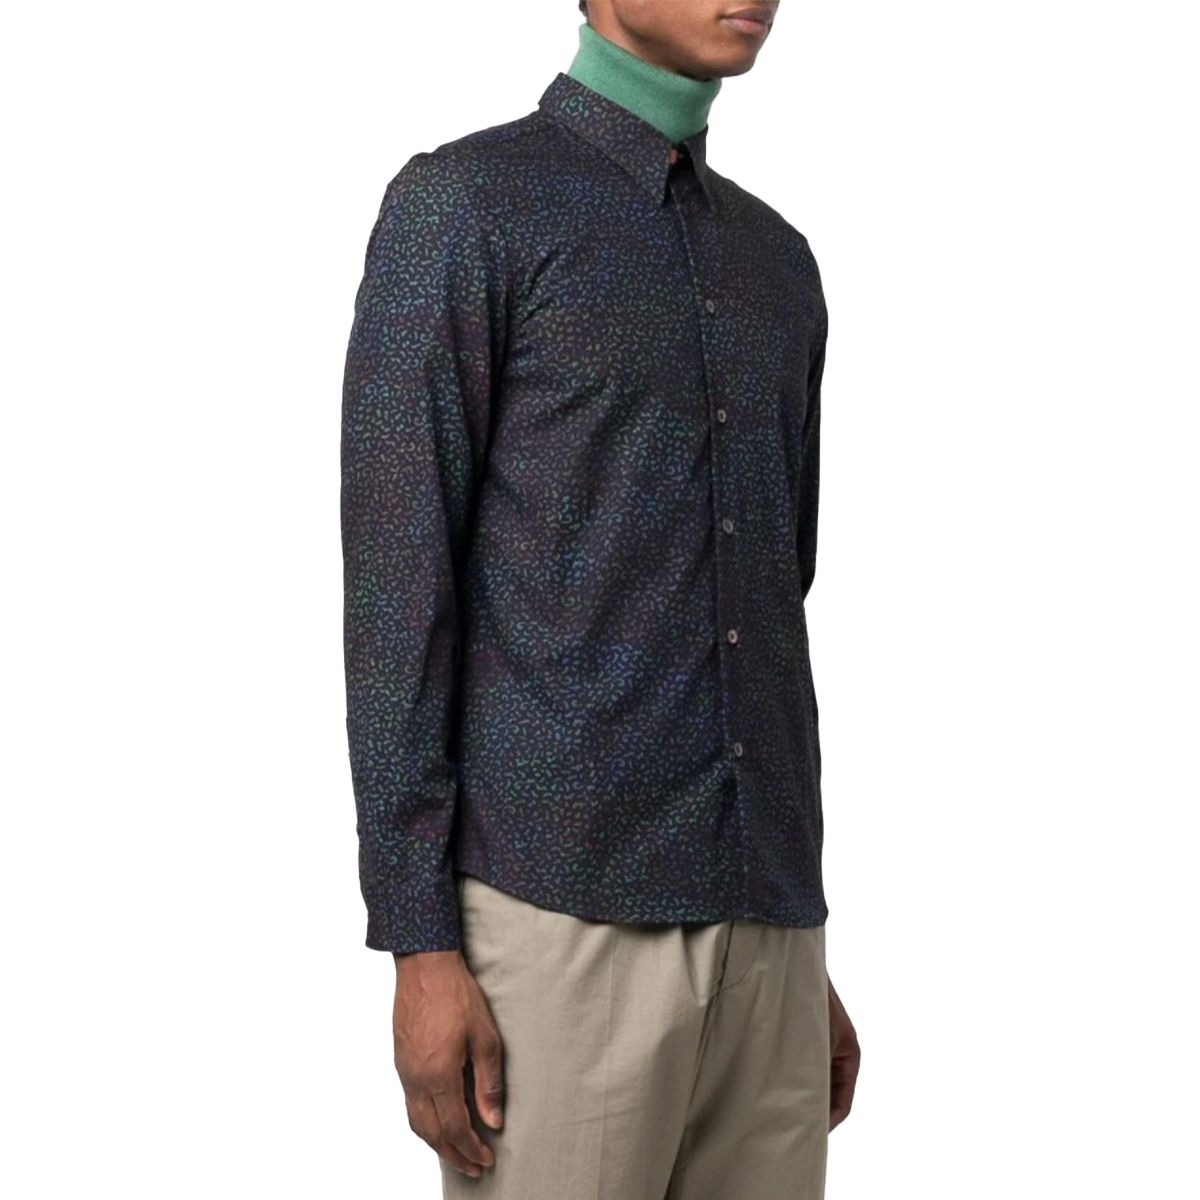 Patterned Button-up Shirt